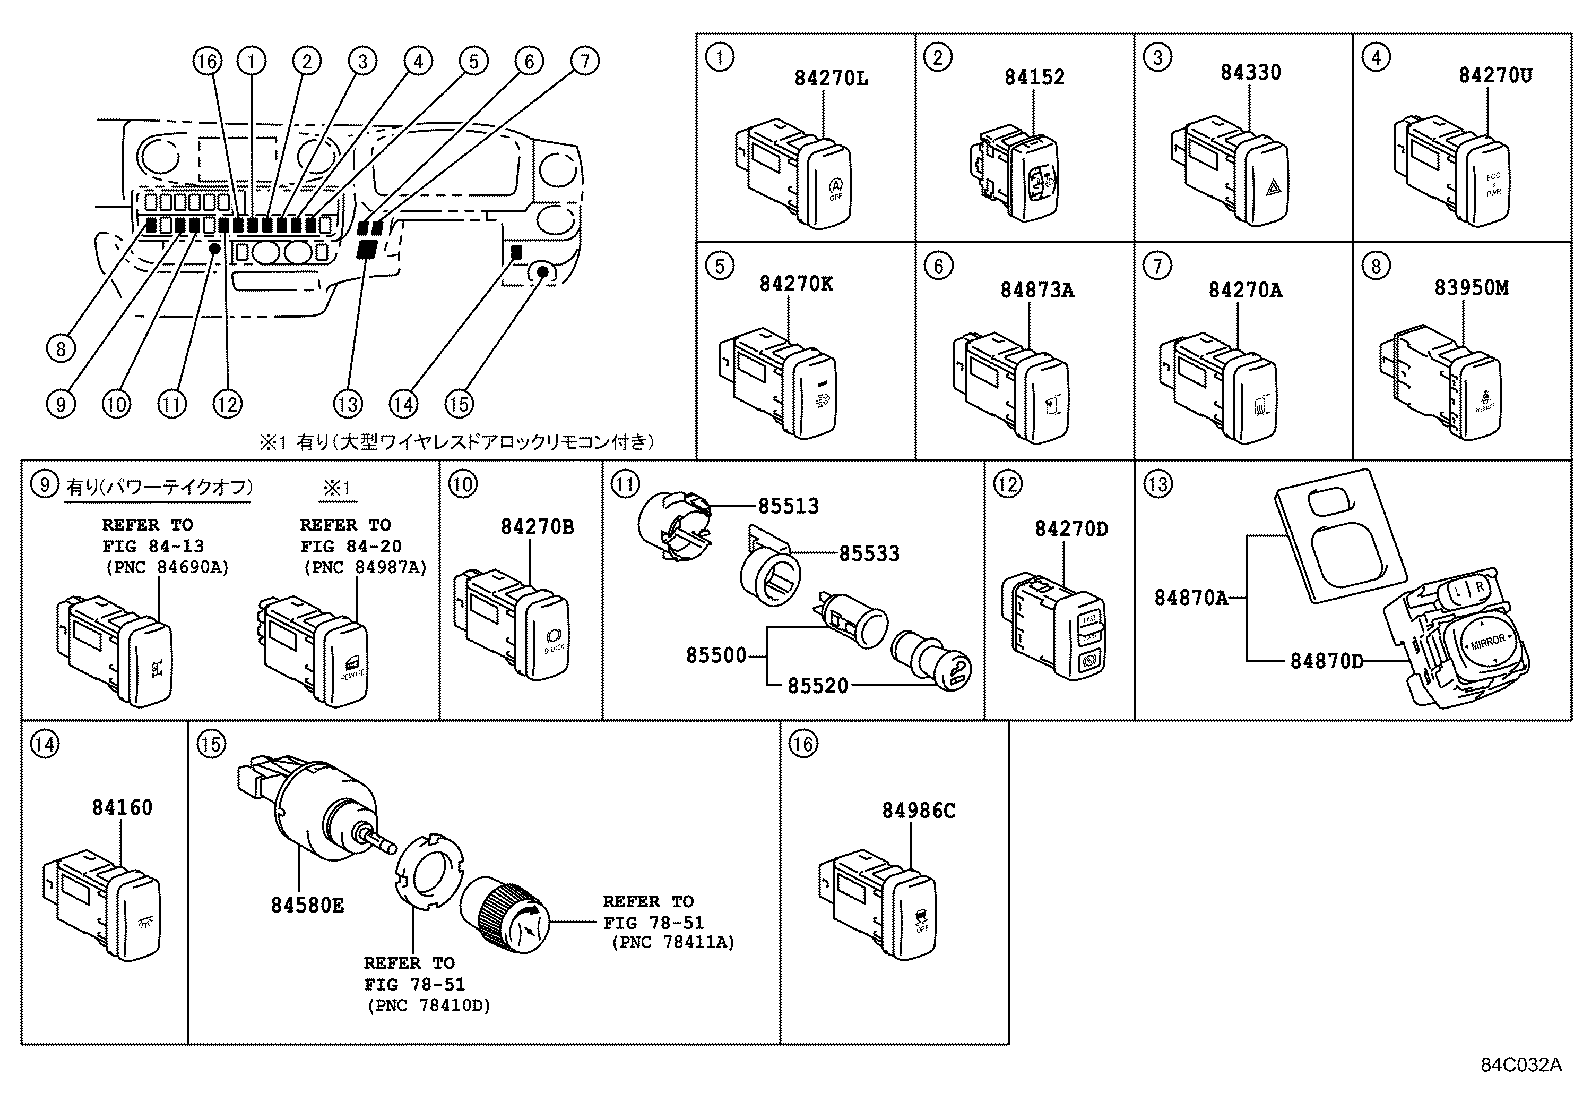  DYNA TOYOACE HV |  SWITCH RELAY COMPUTER